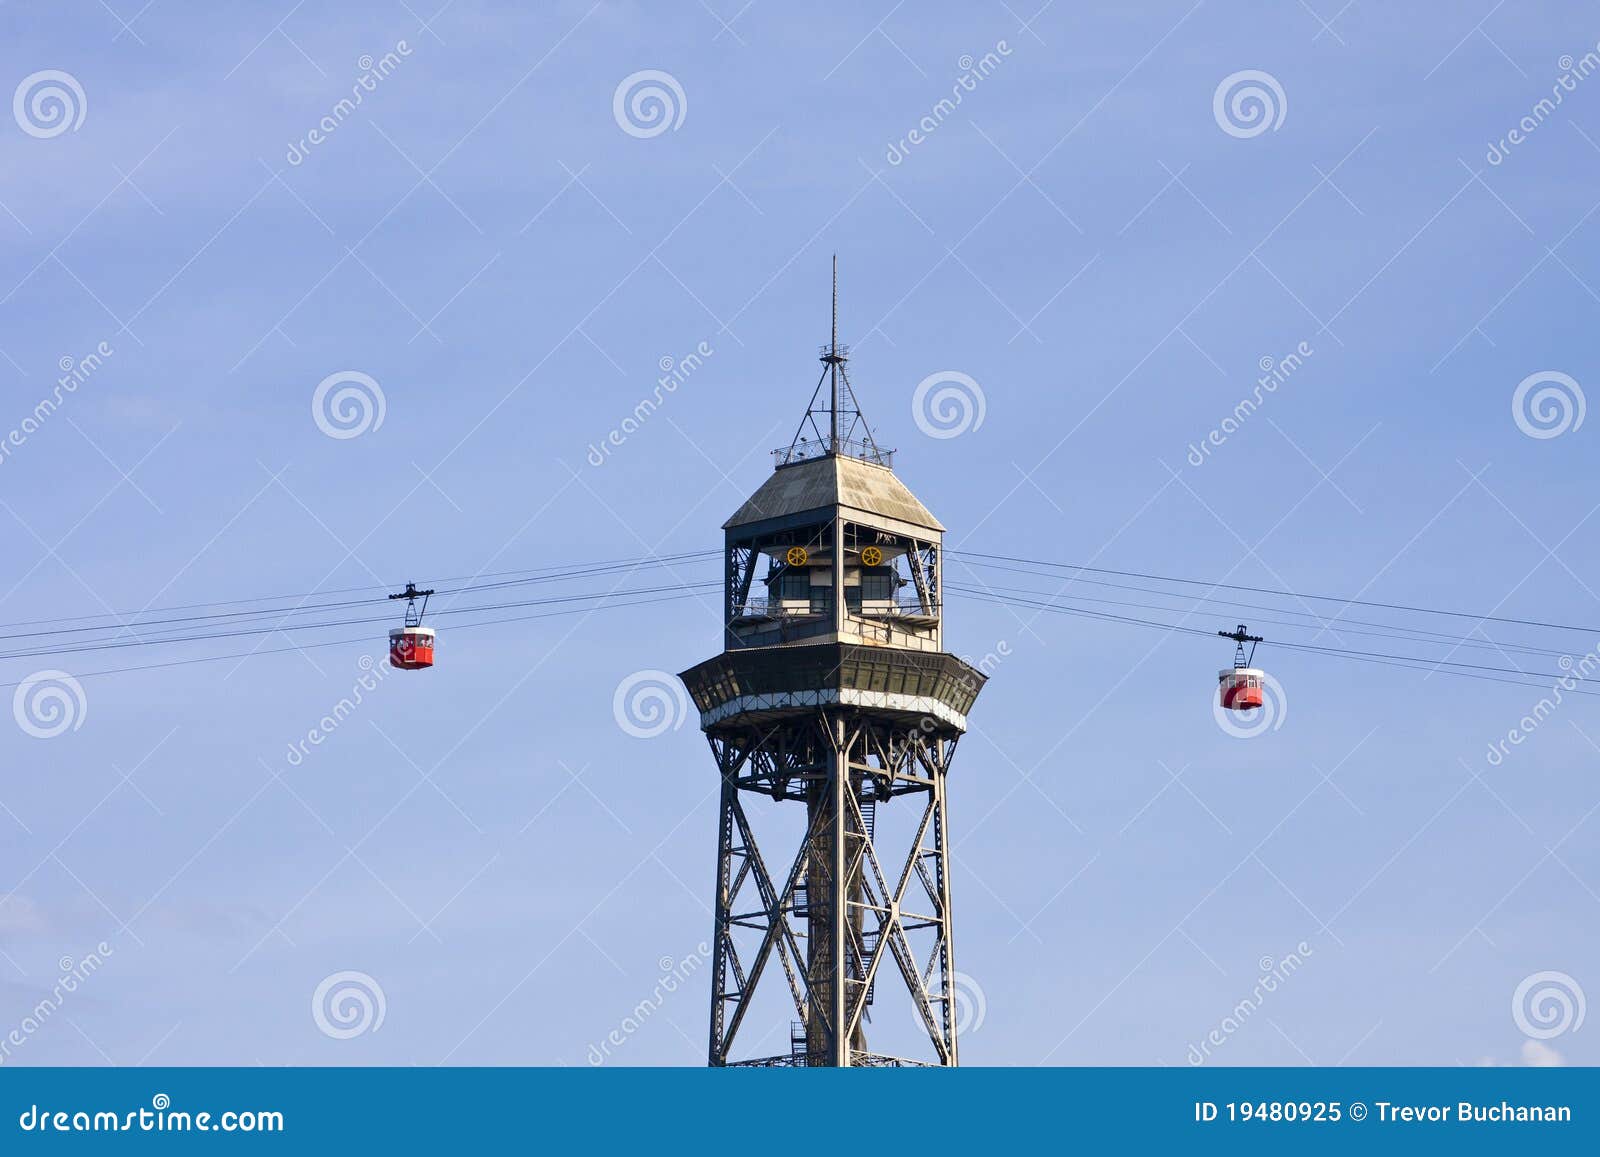 montjuic cable car